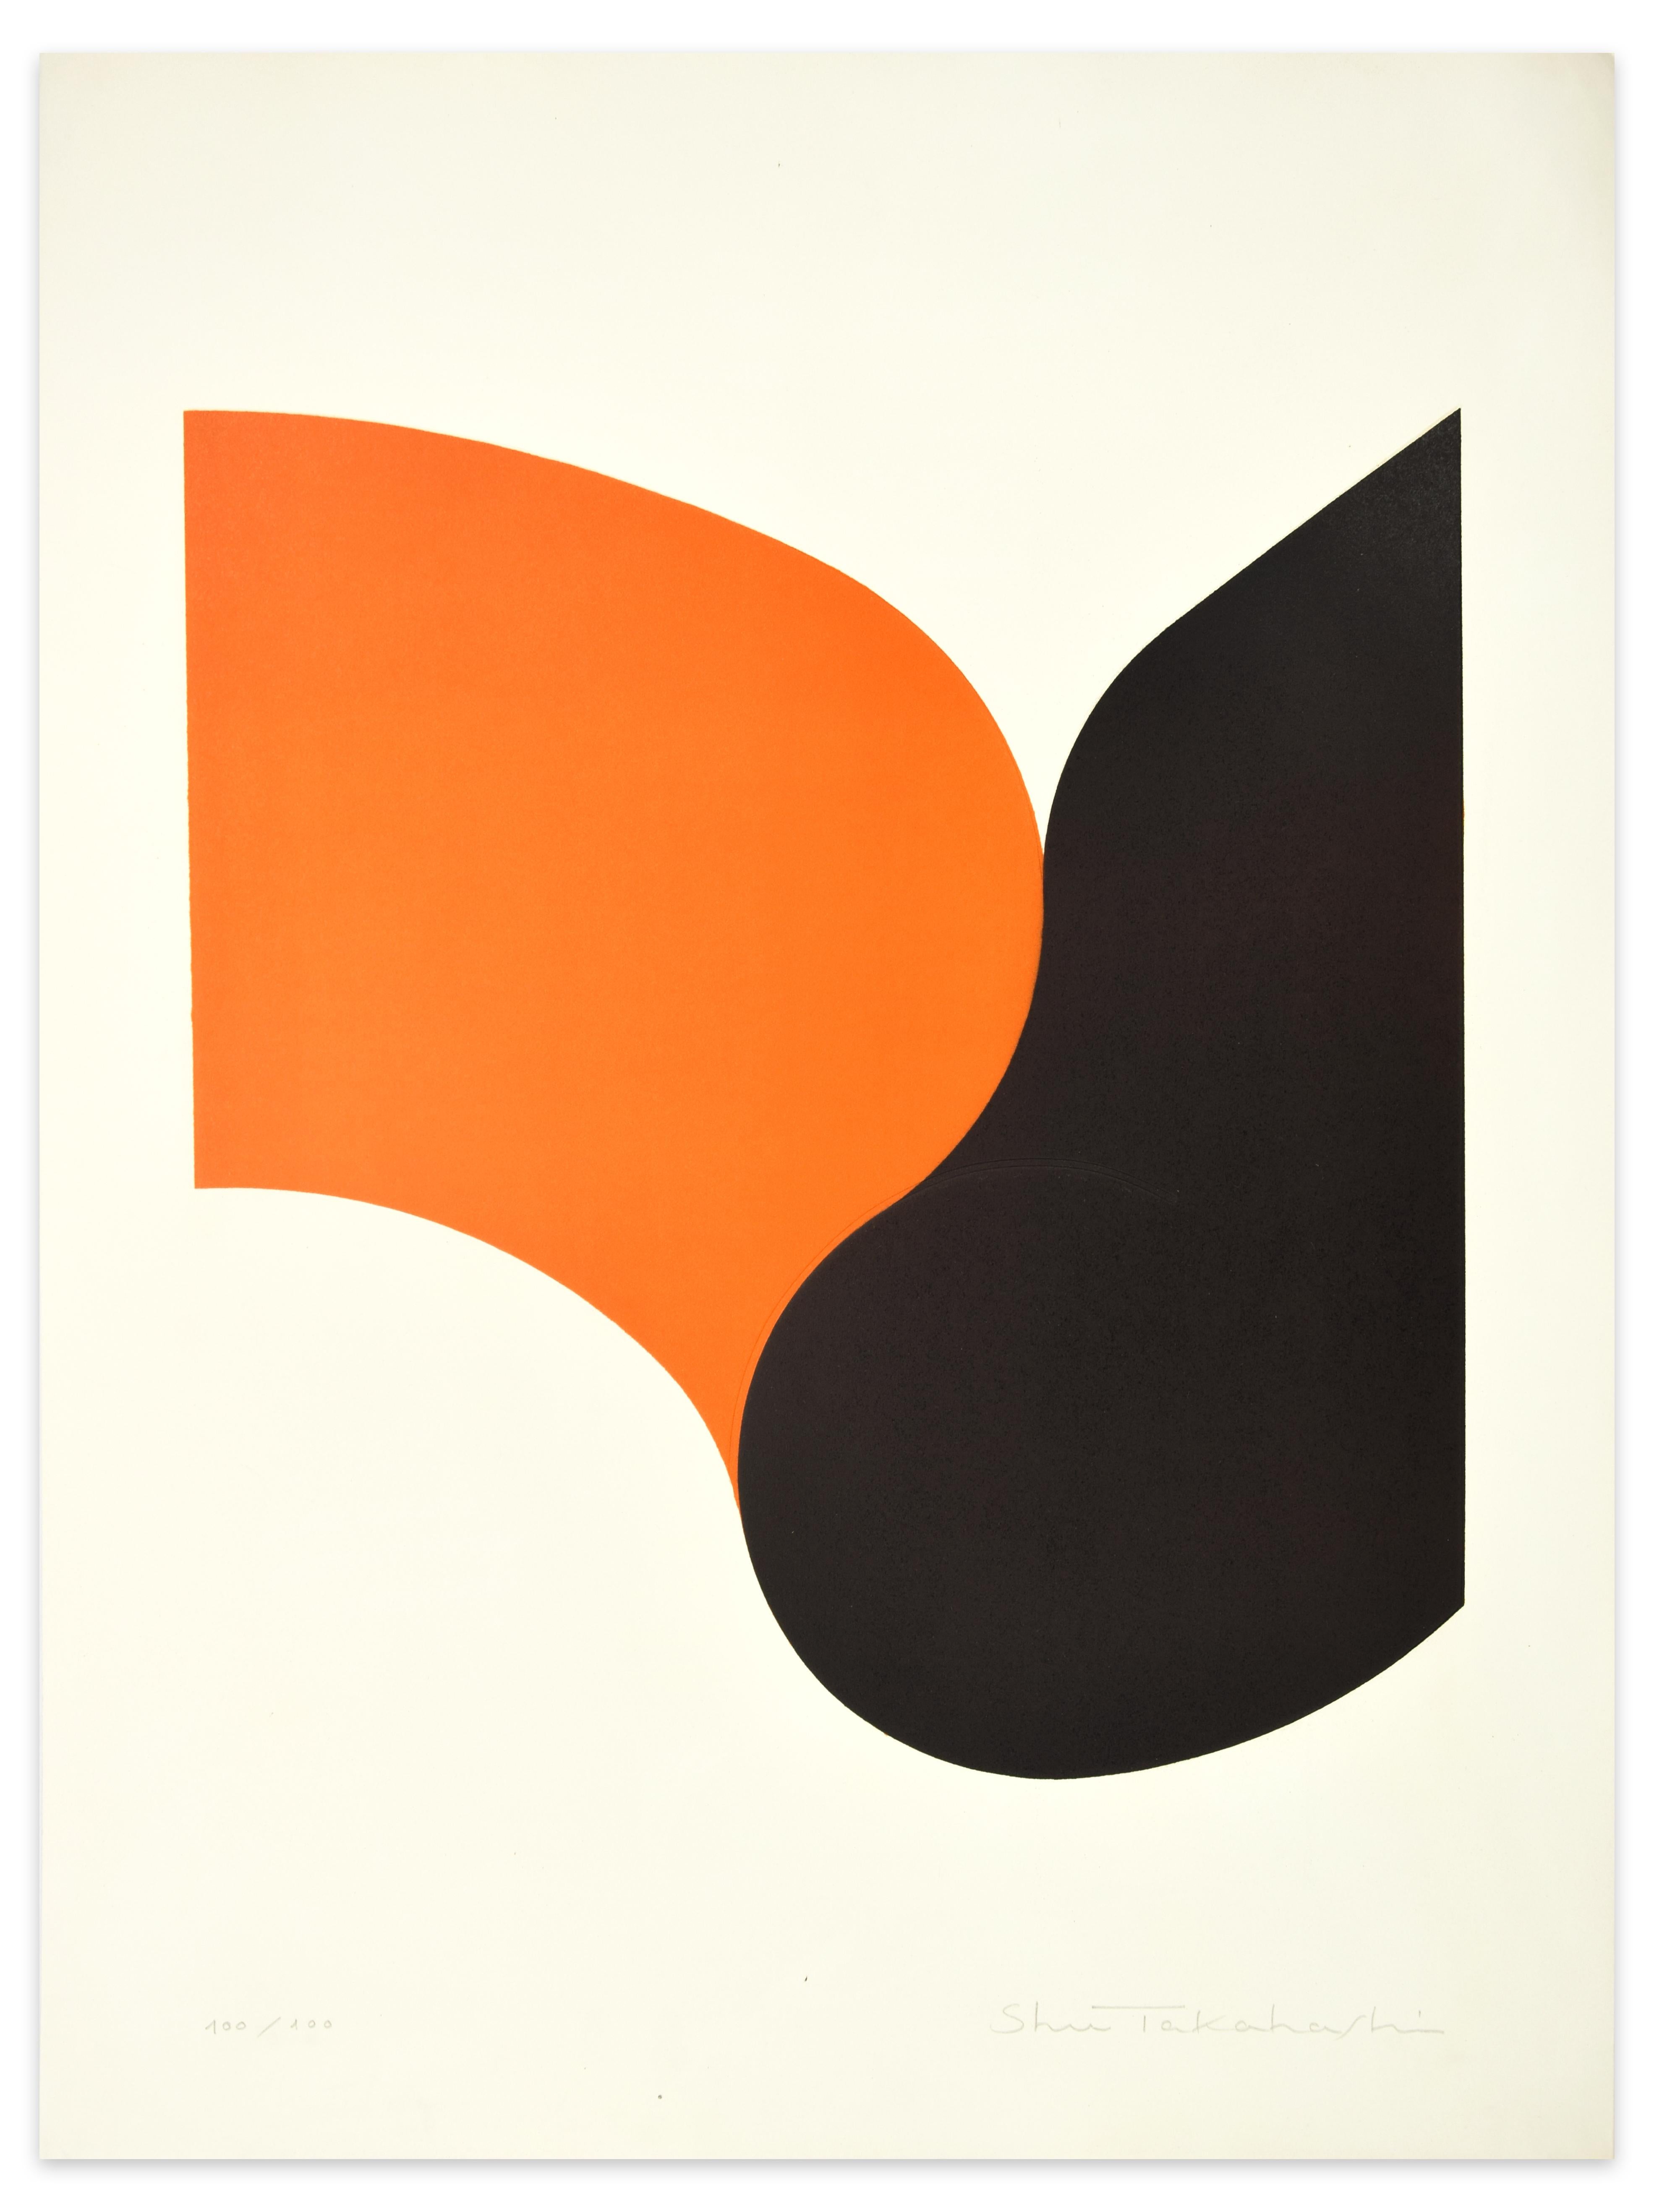 Original chalcography and serigraph by Shu Takahashi. Rare variant with the red replaced by a vivid orange.
Belongs to the edition of 100 prints hand signed and numbered by the Artist. 

Shu Takahashi was born in Hiroshima in 1930. In 1950 he moved